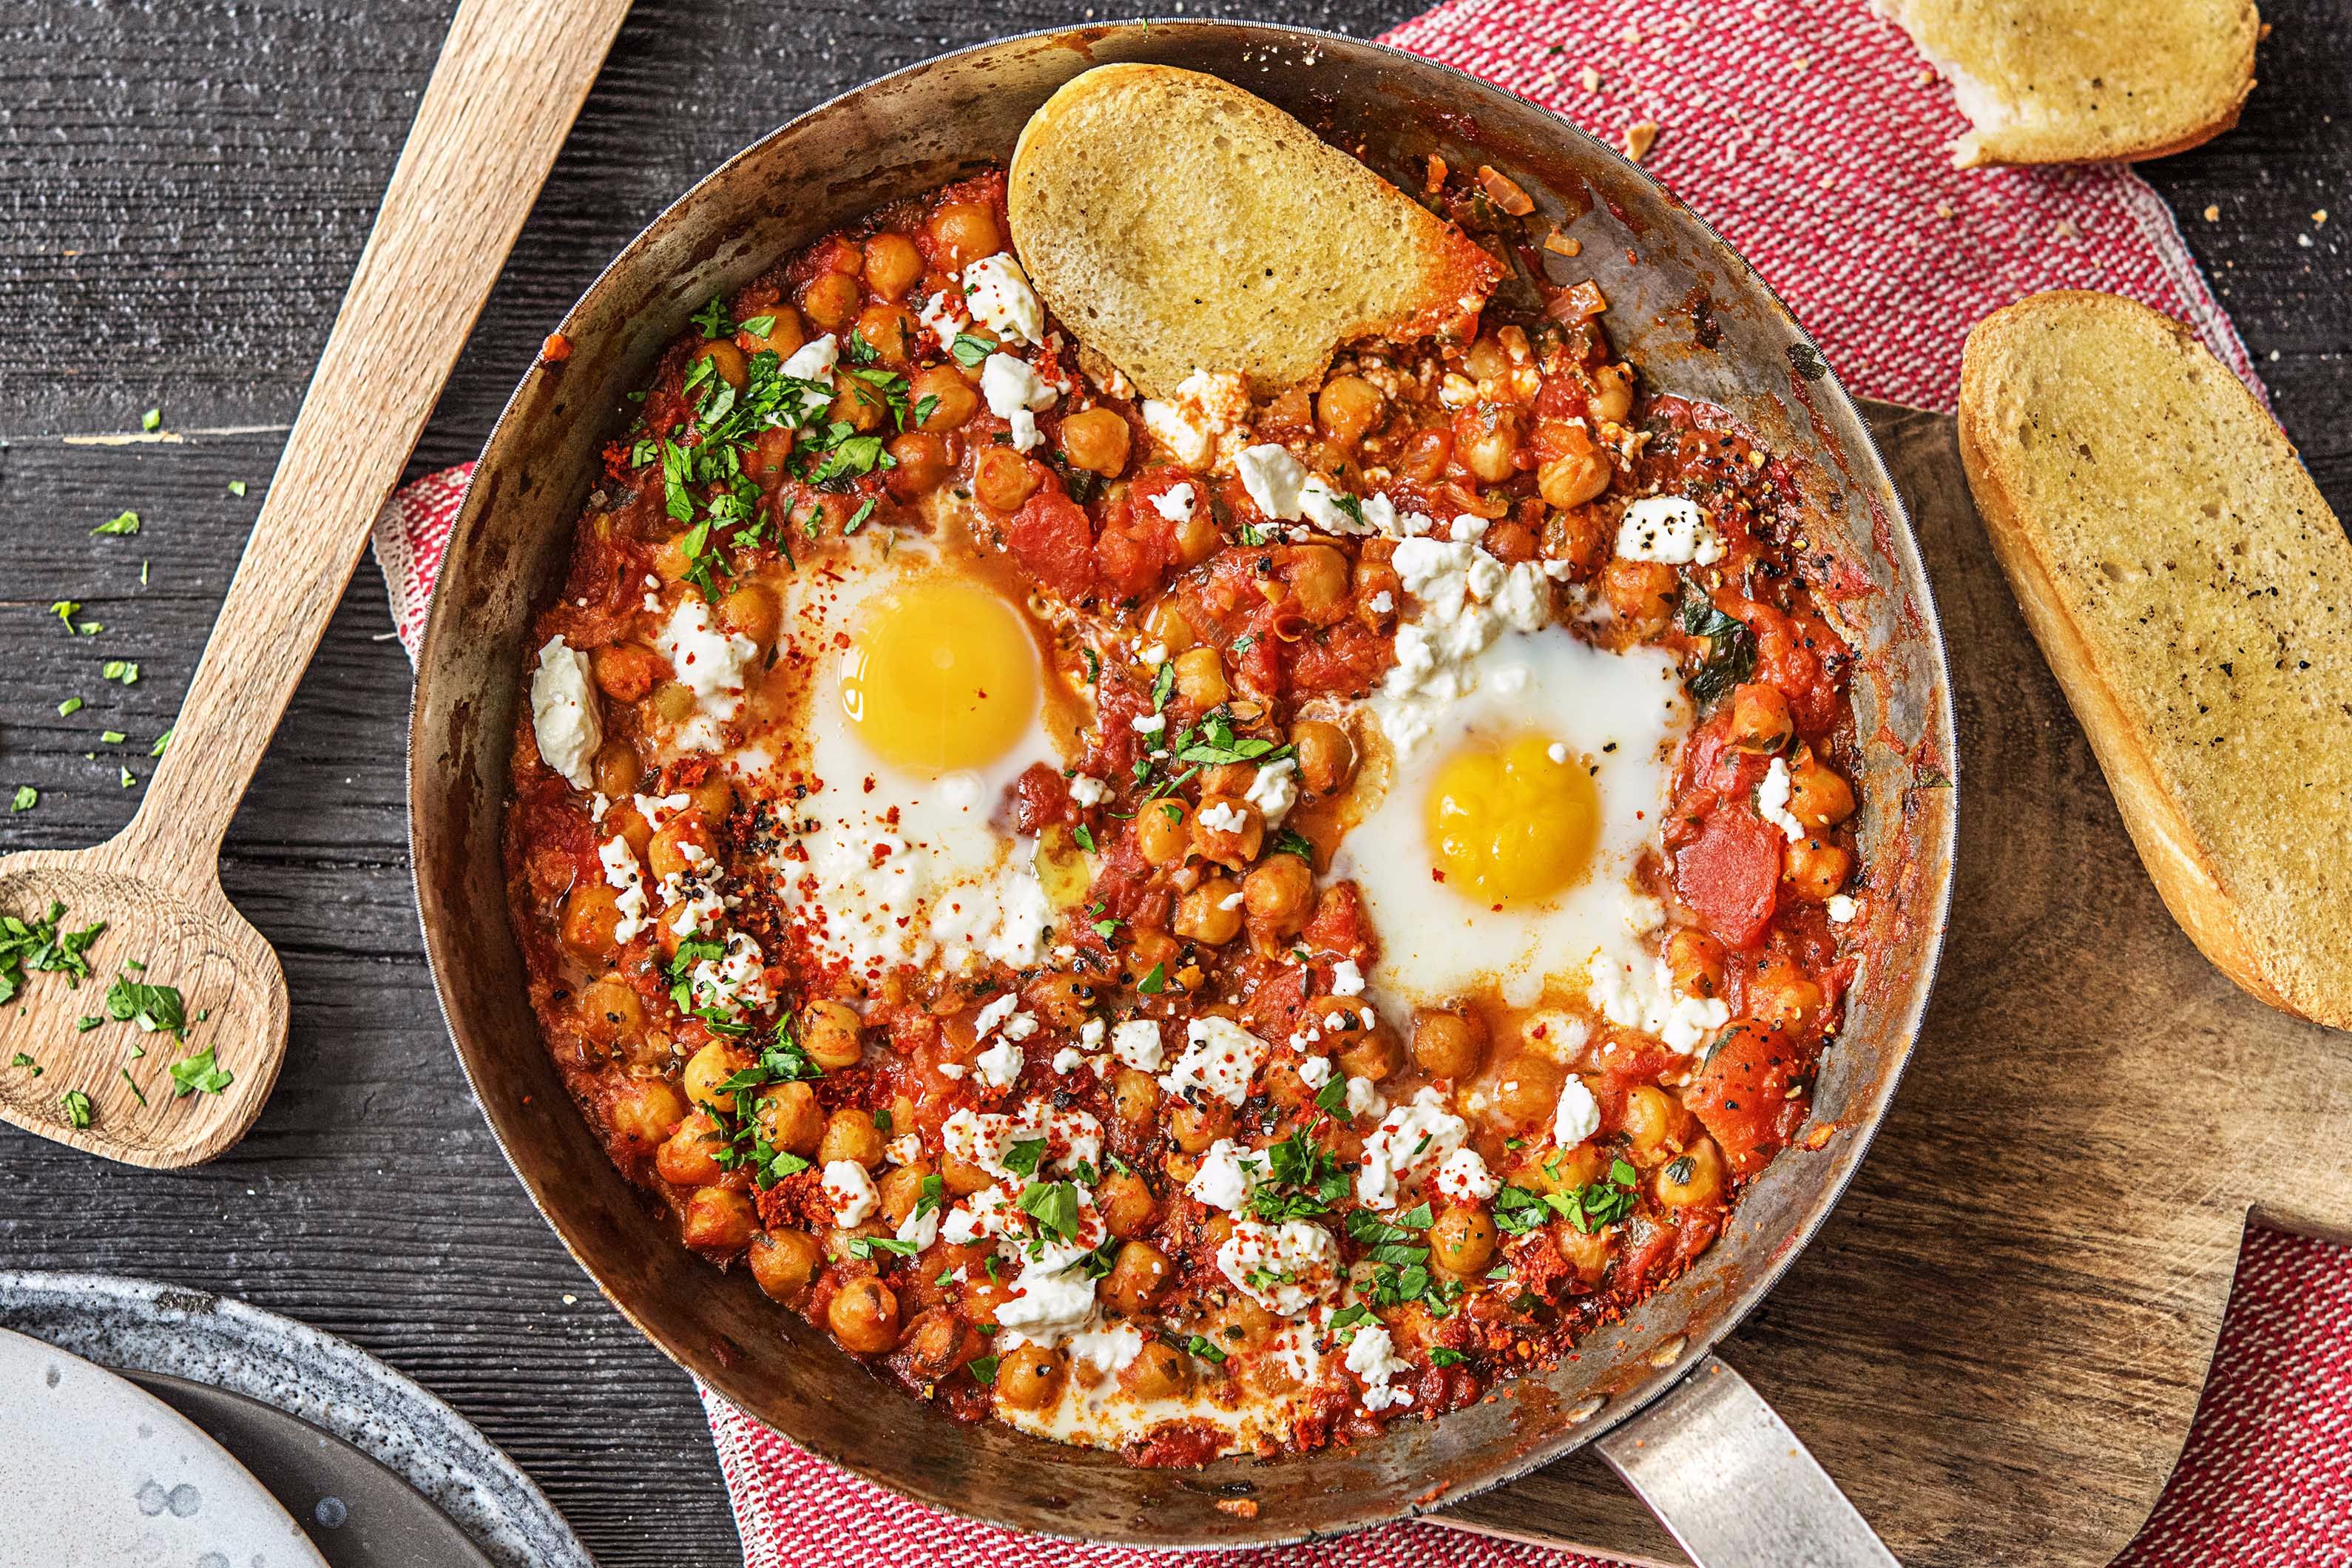 Cozy Chickpea and Egg Skillet Recipe